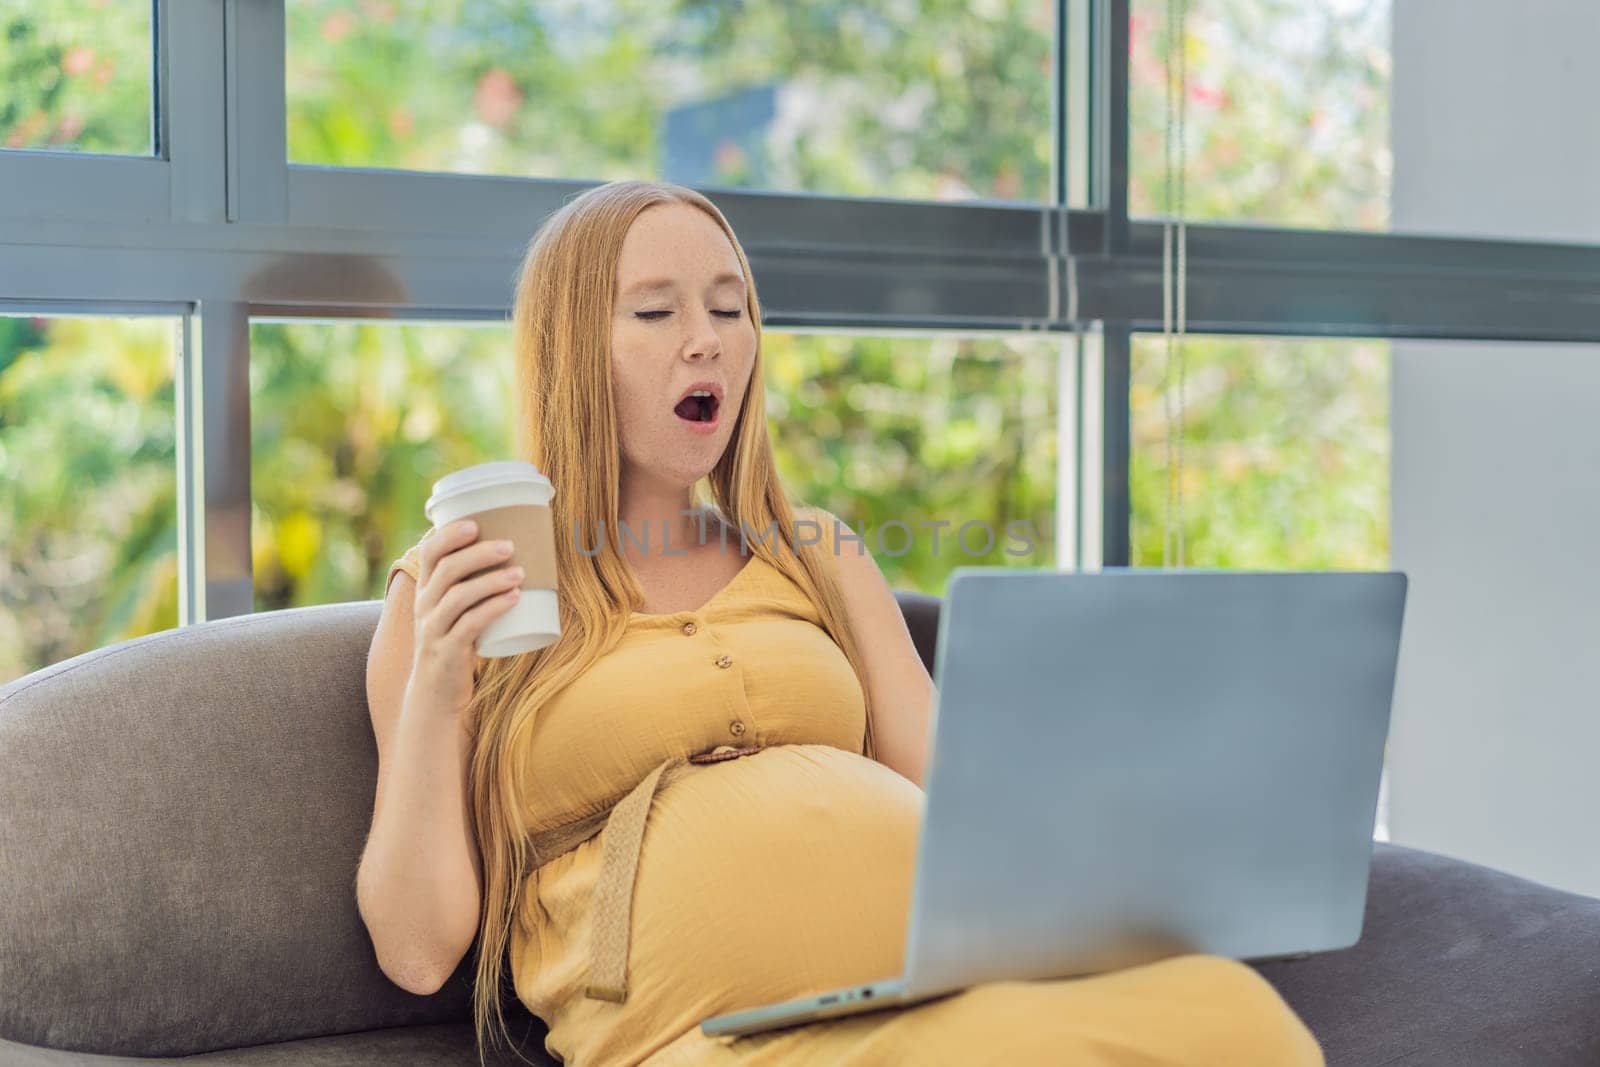 Tired pregnant woman at work drinks coffee caution advised due to potential harm of caffeine during pregnancy by galitskaya